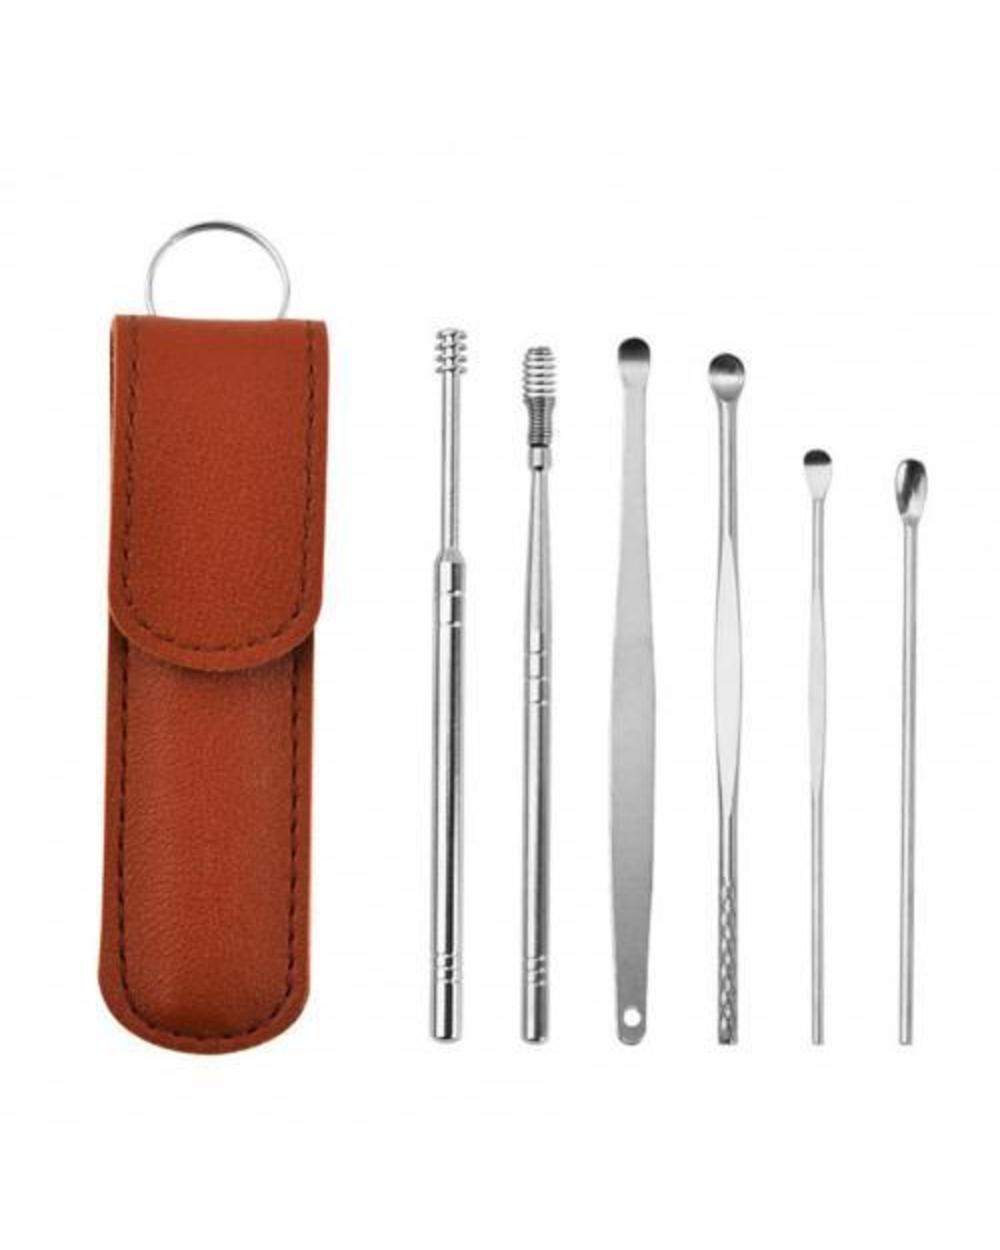 (CHRISTMAS HOT SALE )Innovative Spring EarWax Cleaner Tool Set